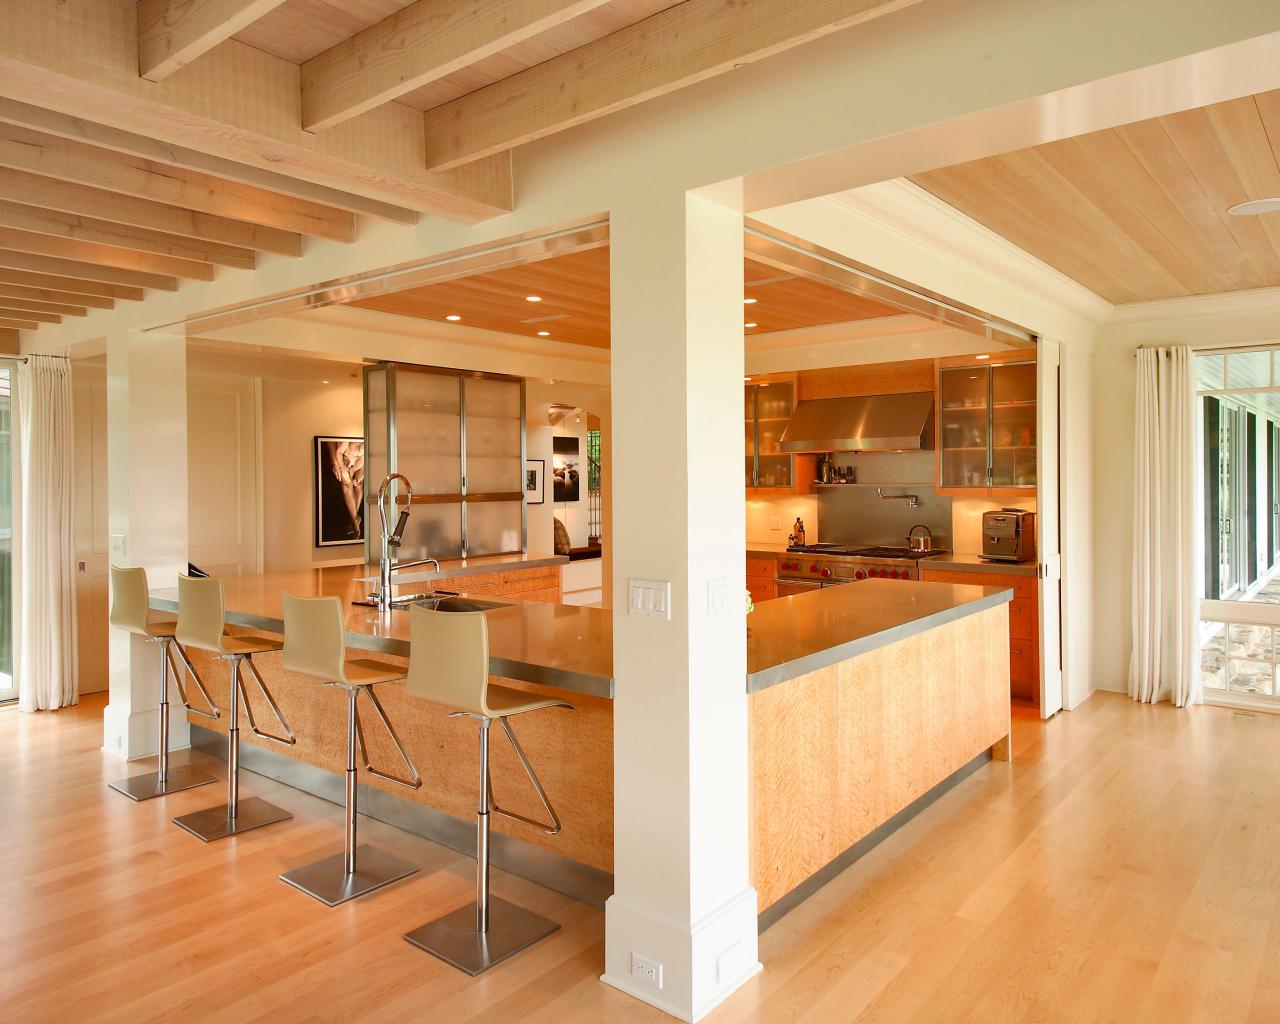 Neutral Contemporary Kitchen With Exposed Ceiling Beams | HGTV